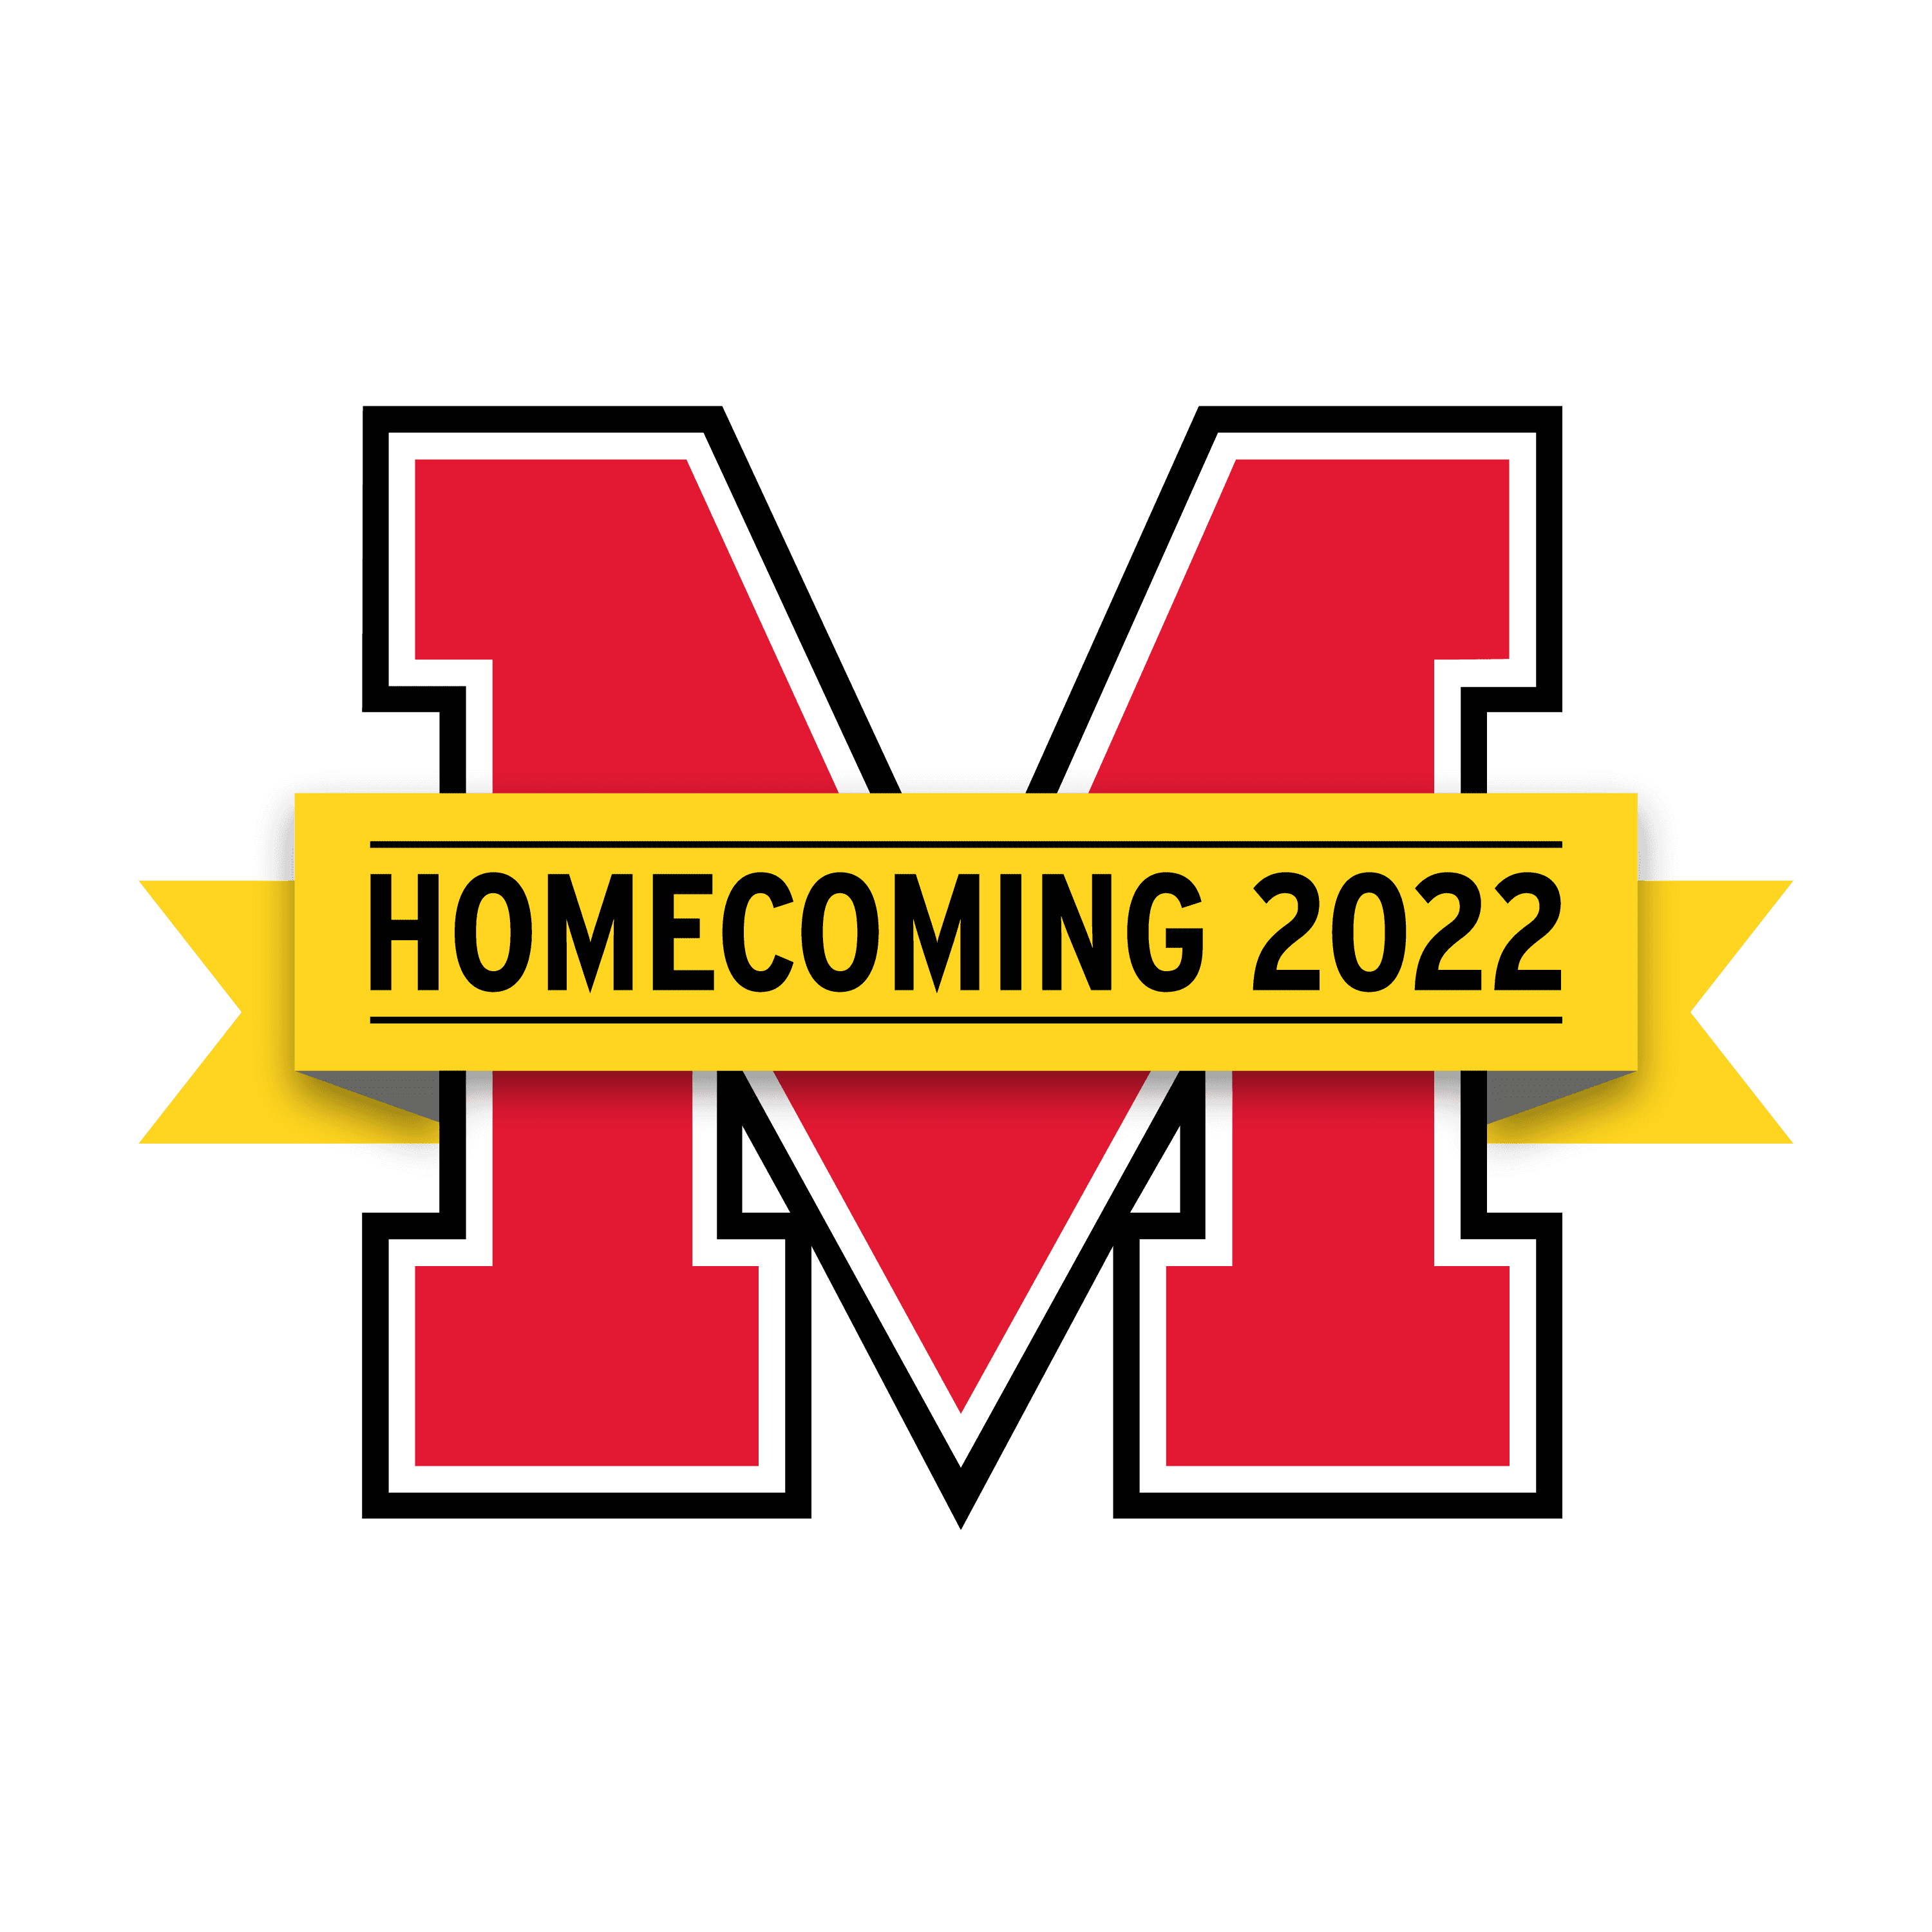 Red M with yellow "Homecoming 2022" banner across